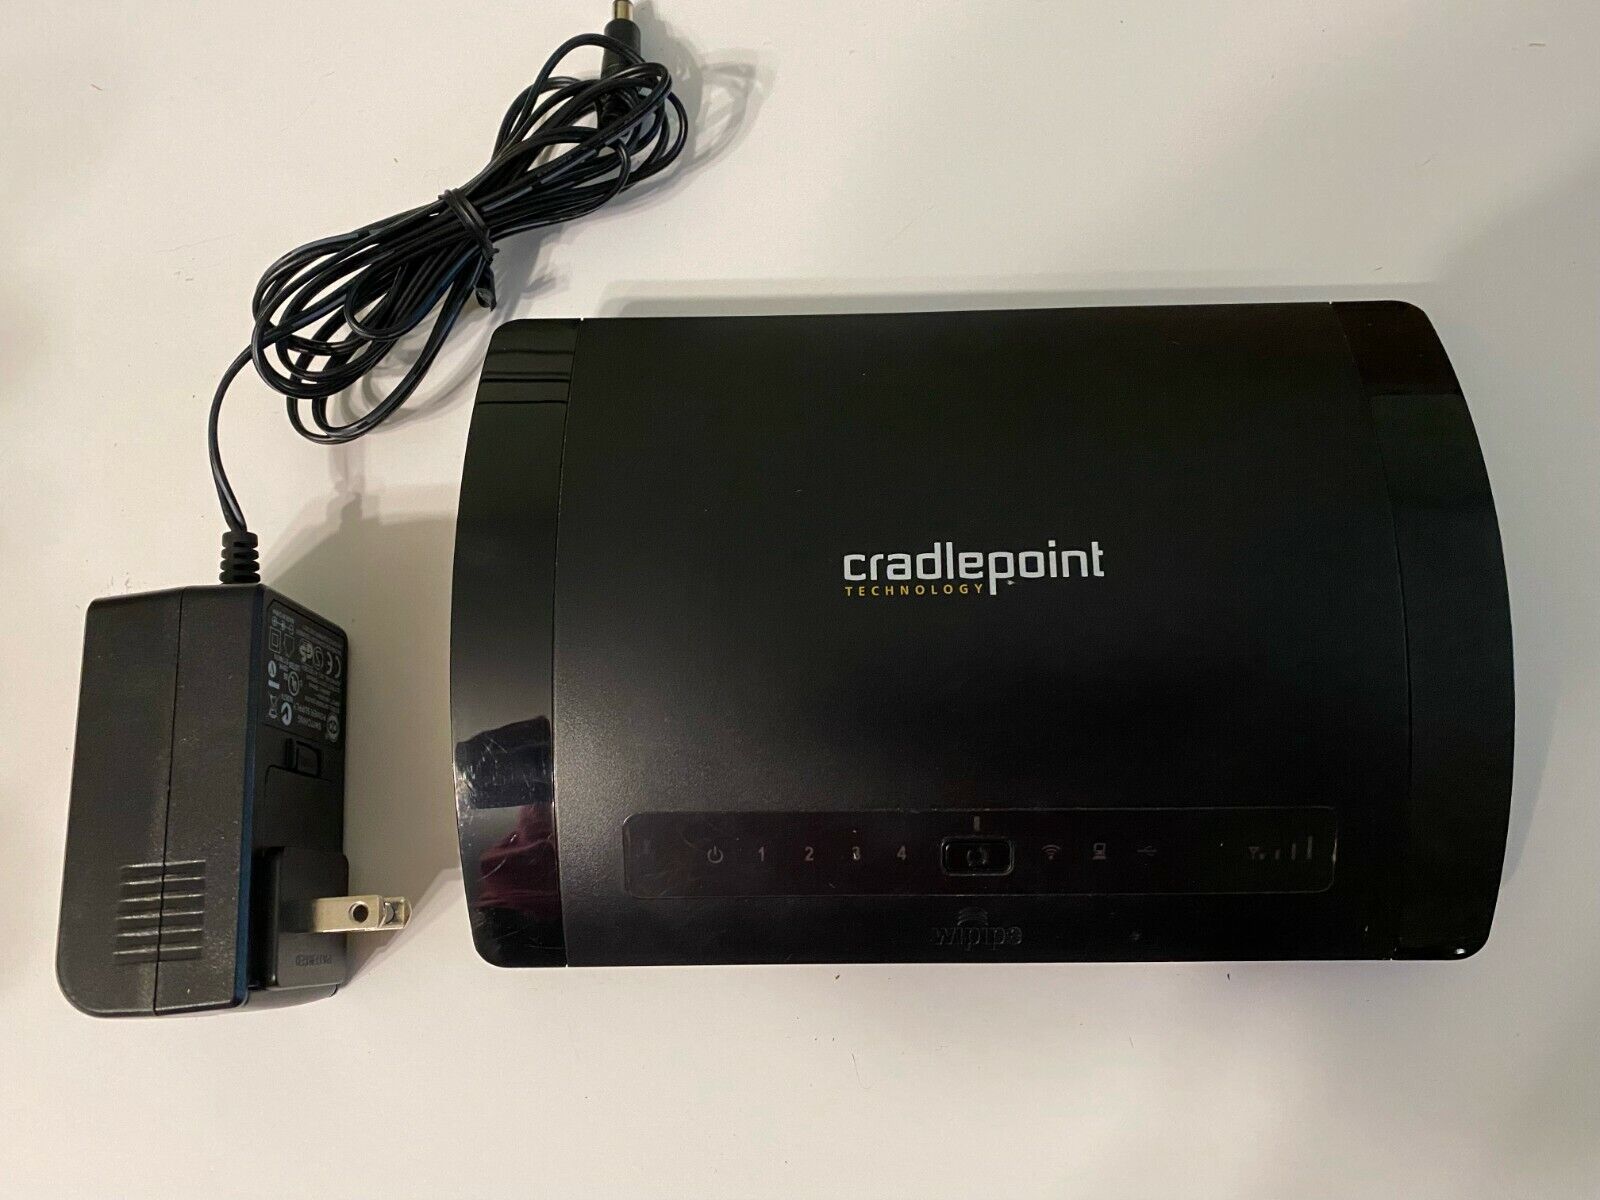  CradlePoint MBR95 300 Mbps 4-Port 10/100 Wireless N Router